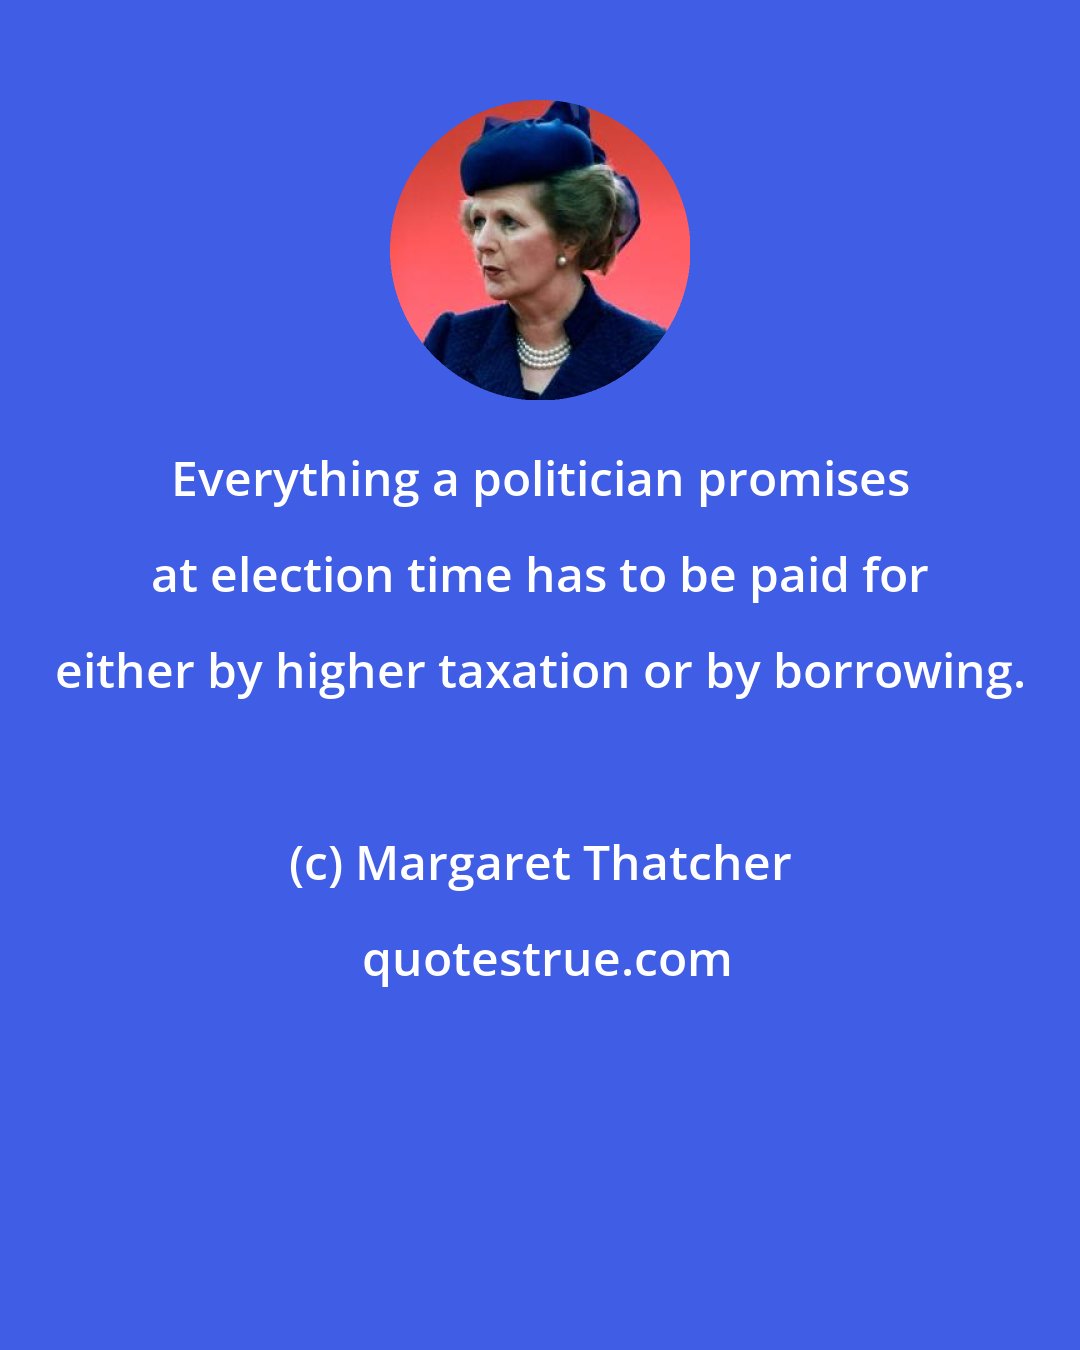 Margaret Thatcher: Everything a politician promises at election time has to be paid for either by higher taxation or by borrowing.